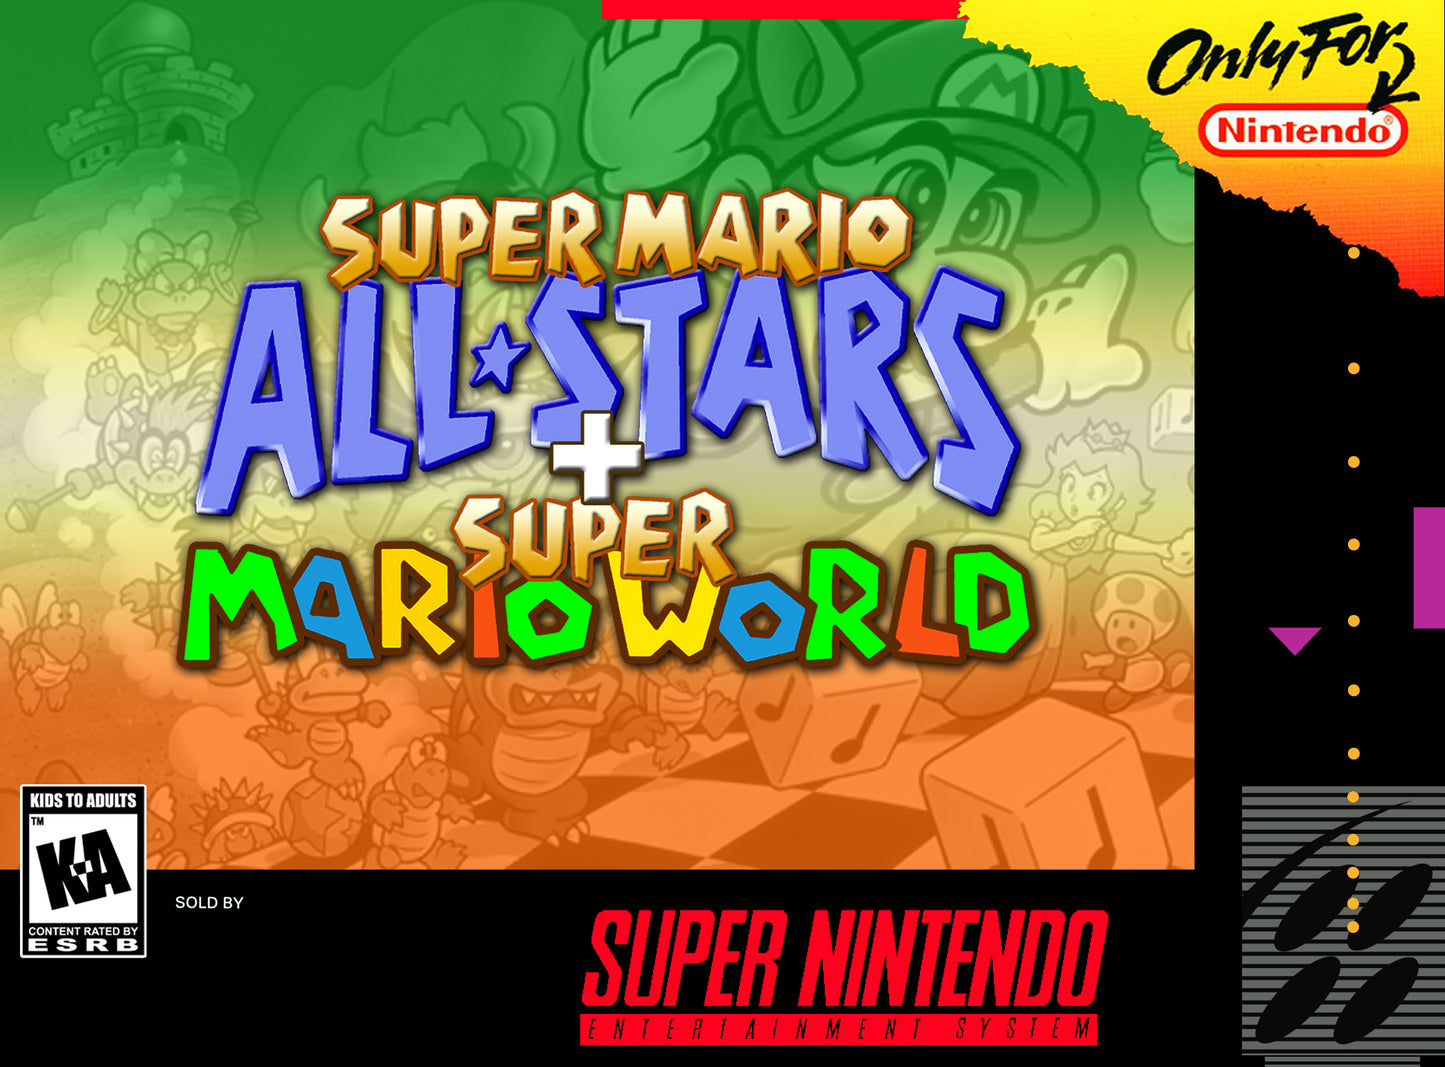 Super Mario All-stars and Super Mario World (Cosmetically Flawed Cartridge)